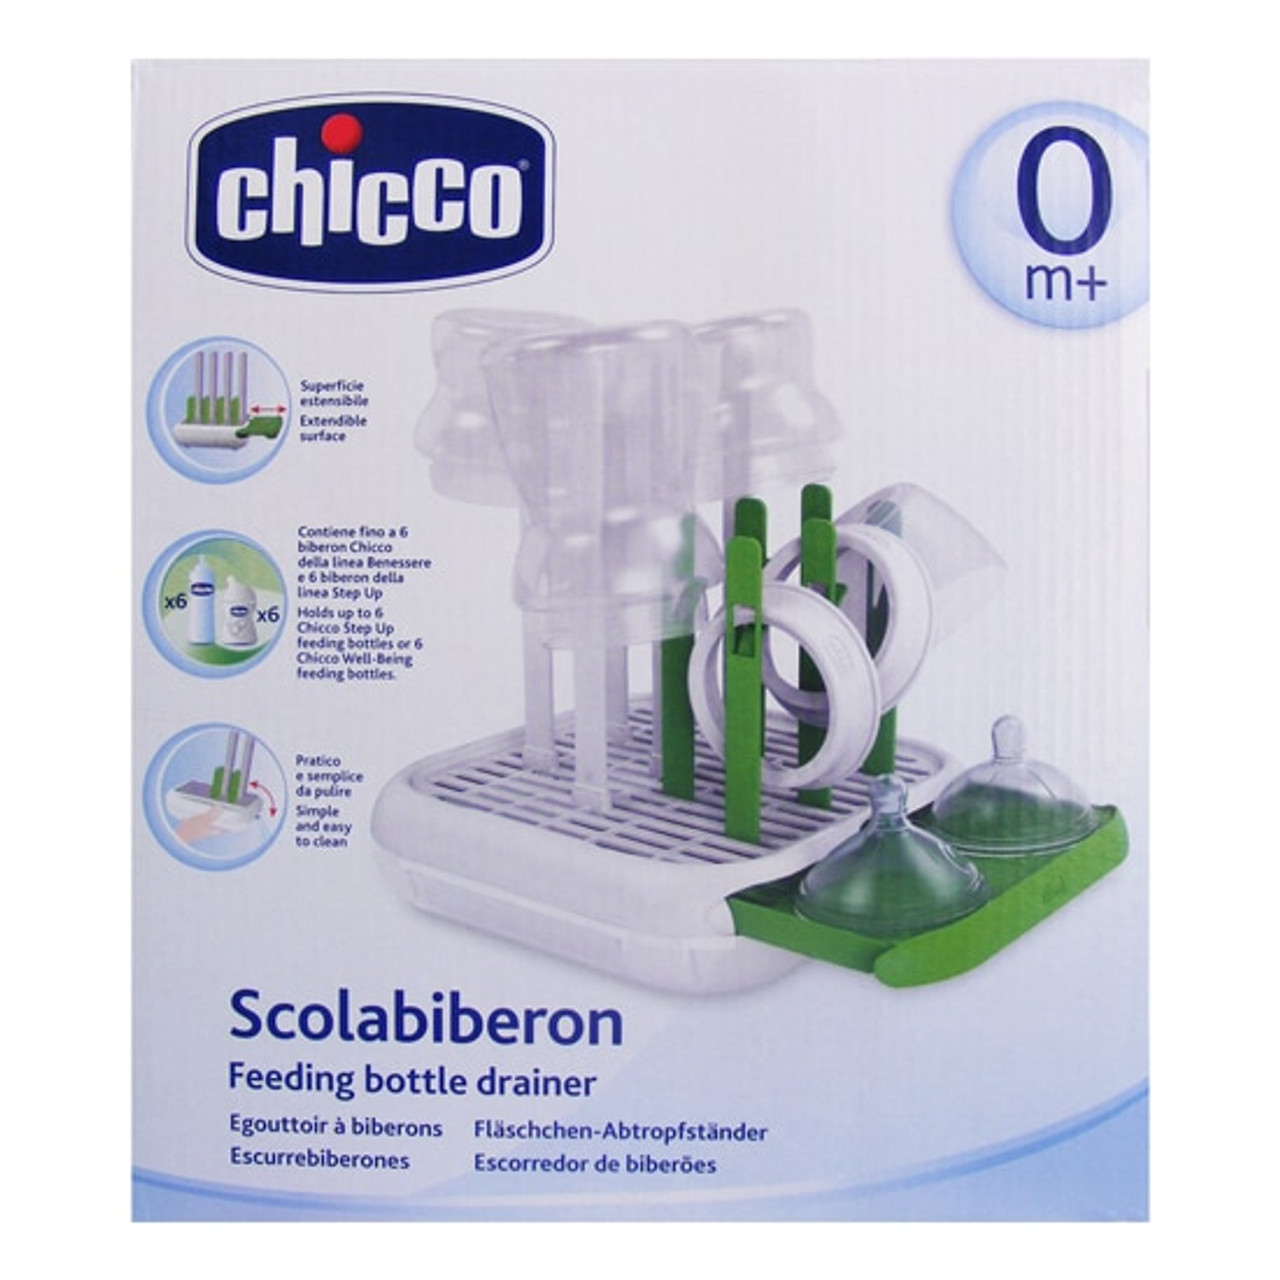 https://cdn11.bigcommerce.com/s-nkevizopn9/images/stencil/1280x1280/products/132/448/65357.30_chicco_feeding_bottle_drainer_pack-1__01692.1498111779.jpg?c=2?imbypass=on